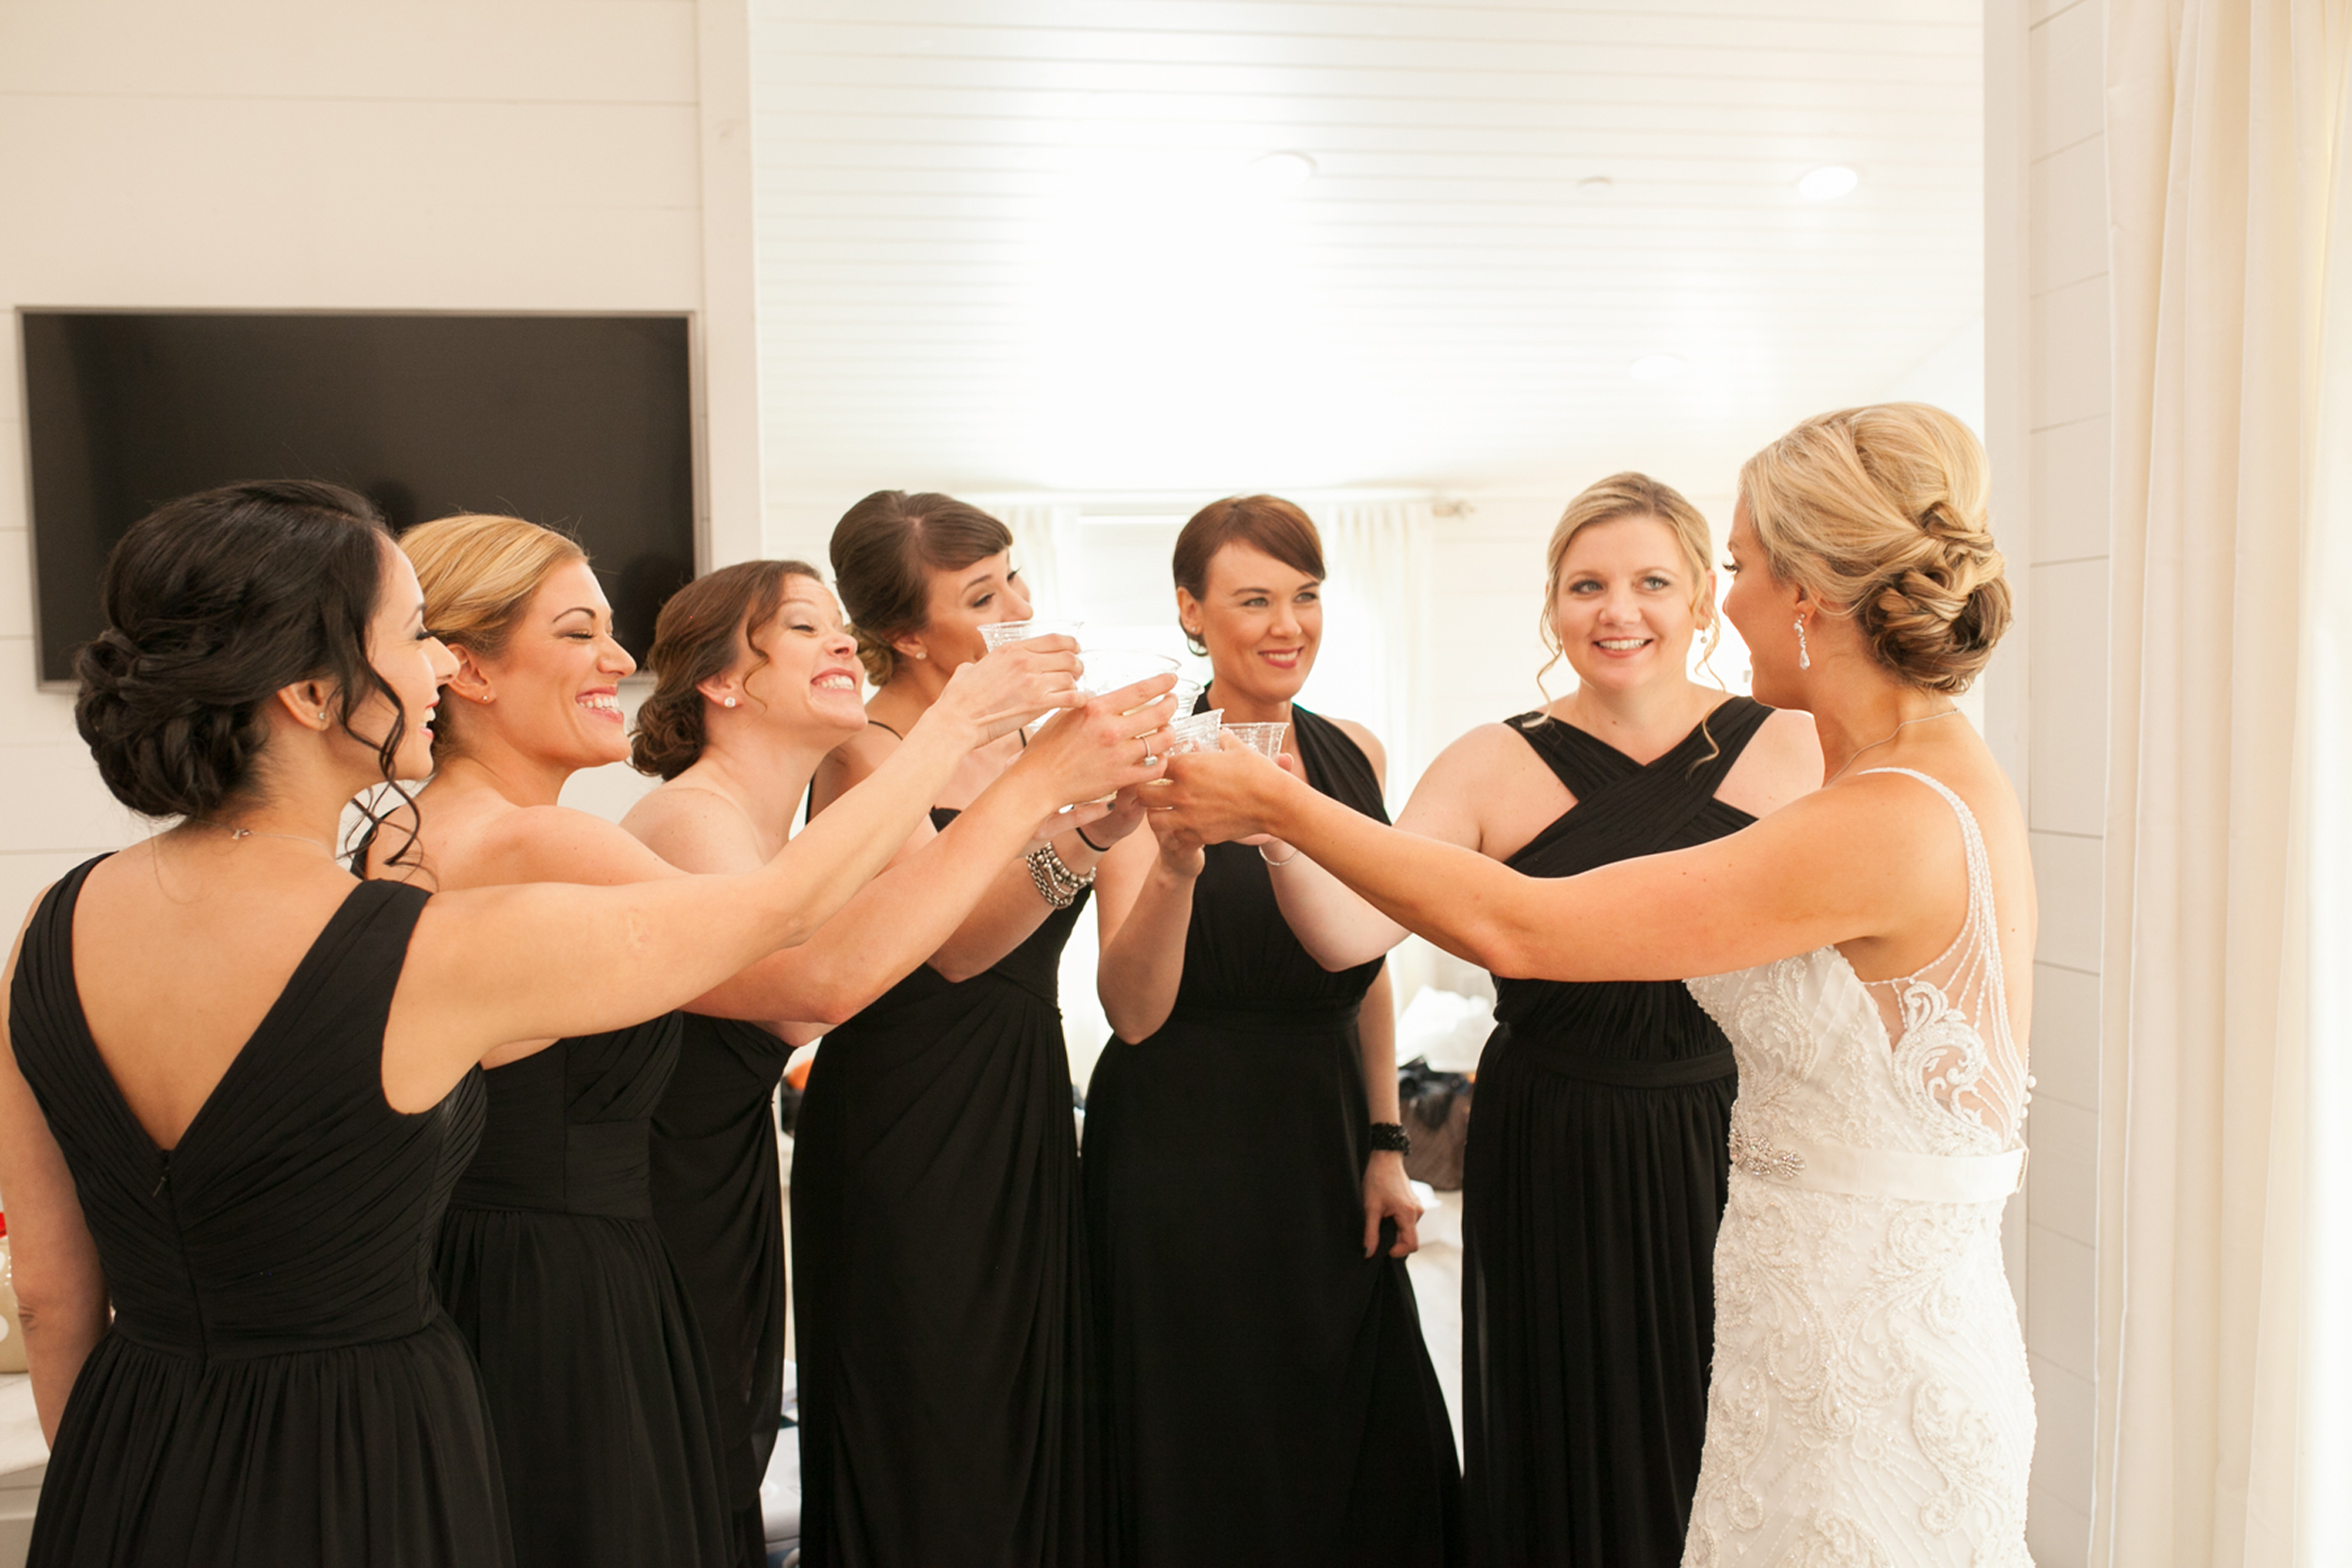 Bride and Bridesmaids toasting to the wedding day!